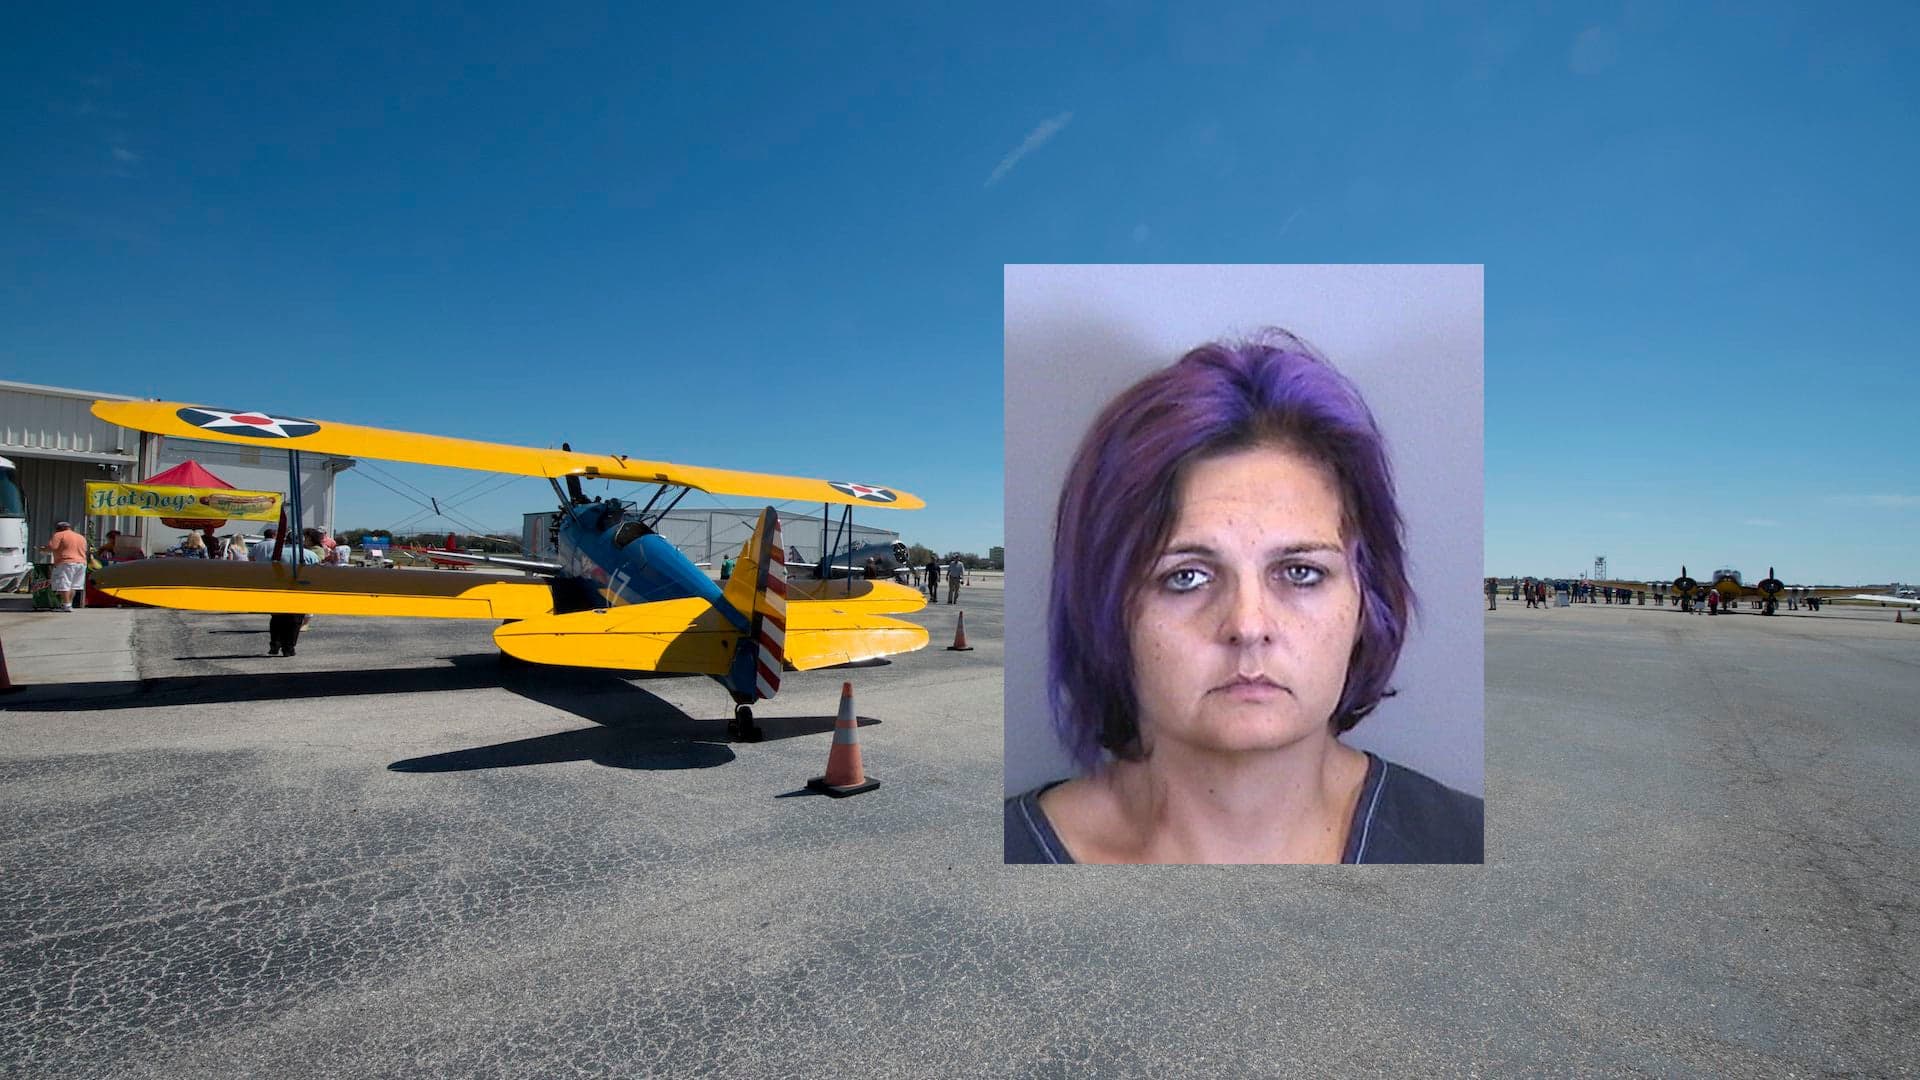 Drunk Florida Woman Crashes Into Airplane After Ramming Down Airport Security Fence With Her Car